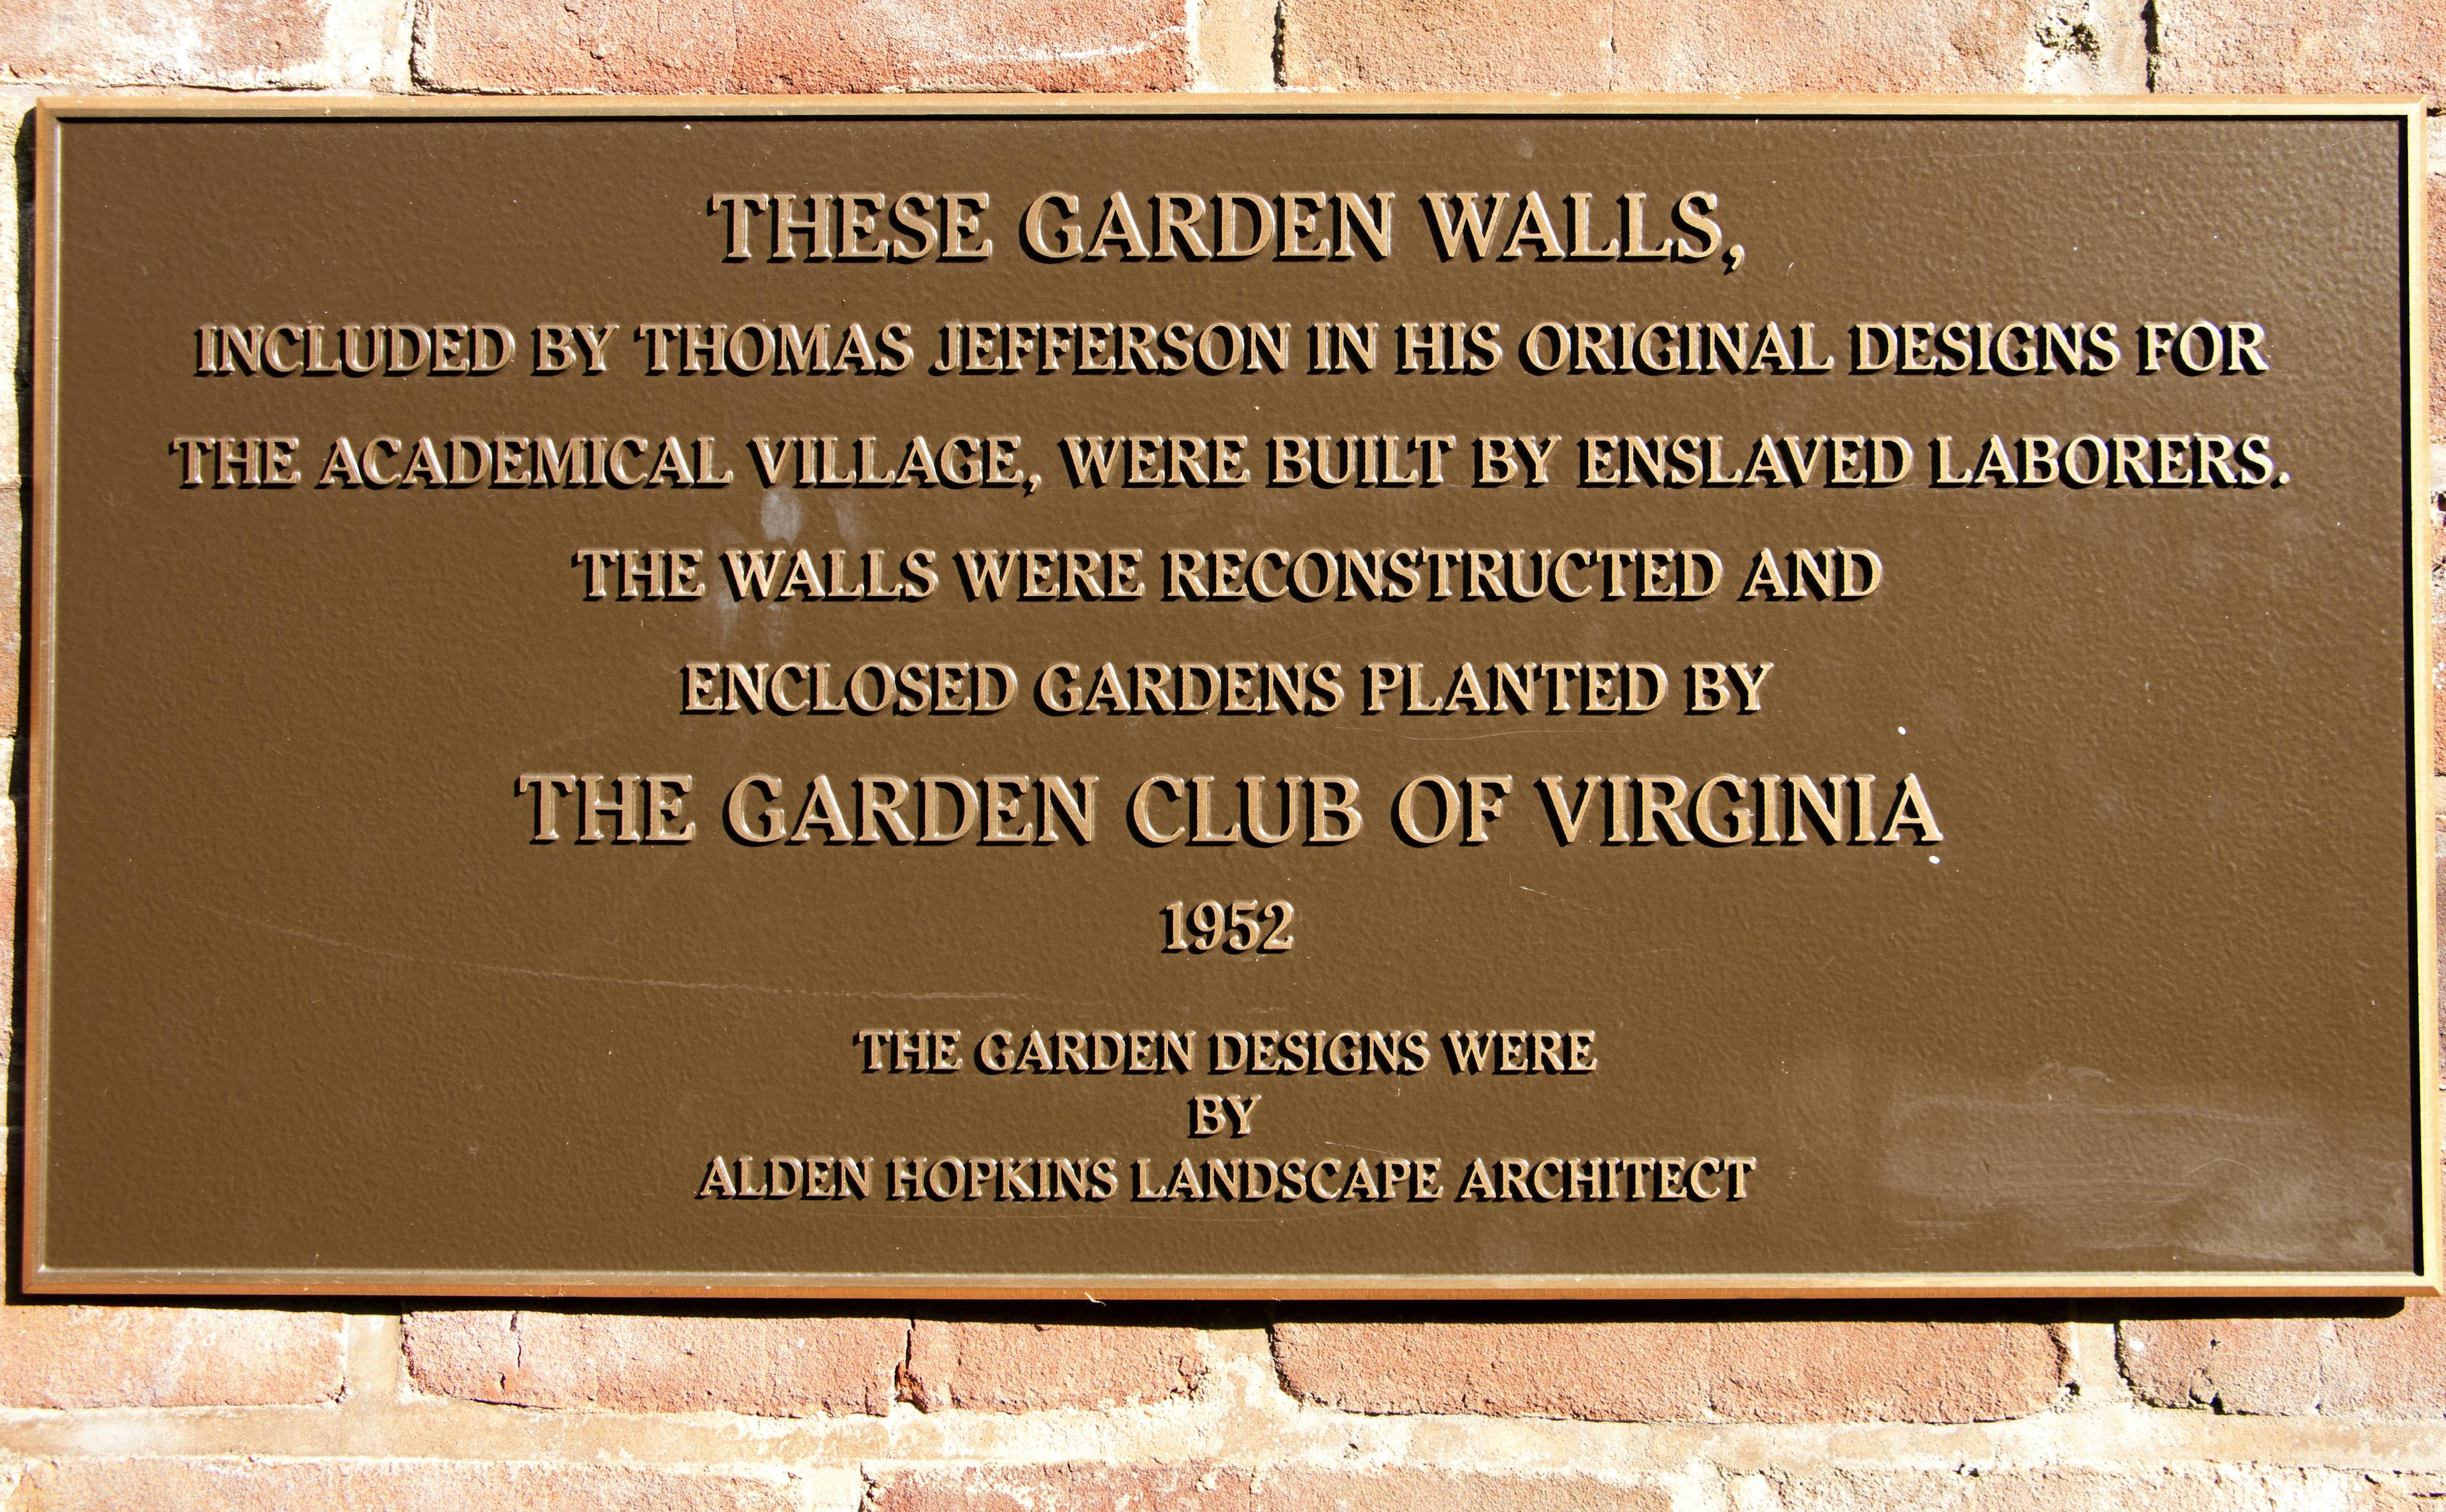 These Garden Walls, included by Thomas Jefferson in his original designs for The Academical Village, were built by enslaved laborers. The walls were reconstructed and enclosed gardens planted by The Garden Club of Virginia. 1952. The garden designs were by Alden Hopkins Lanscape Architect.